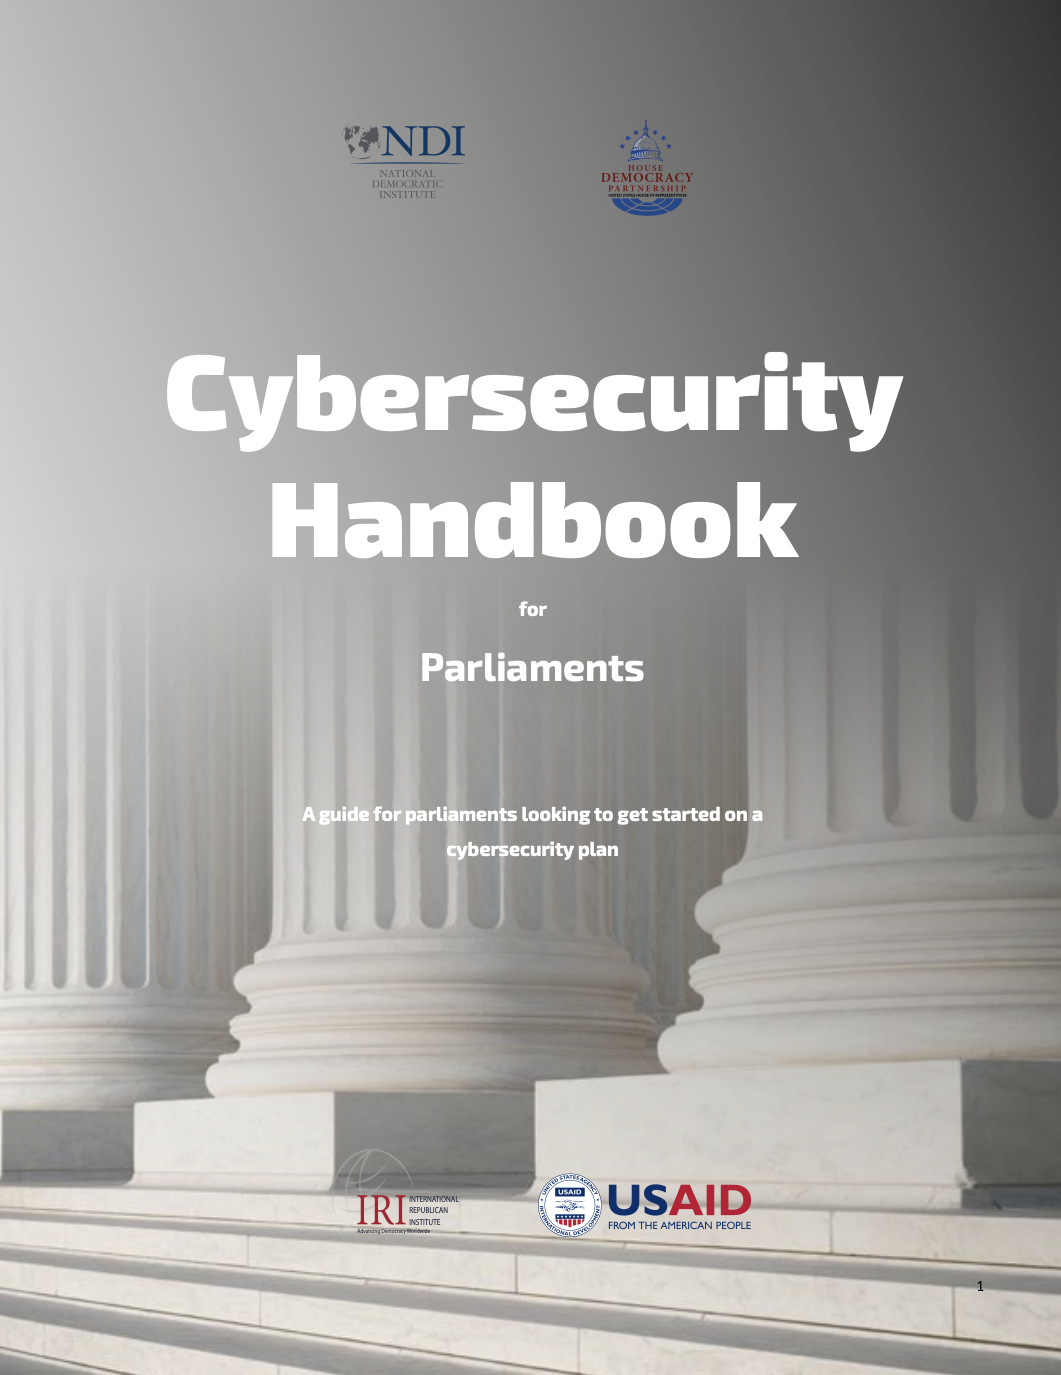 Cybersecurity Handbook for Parliaments